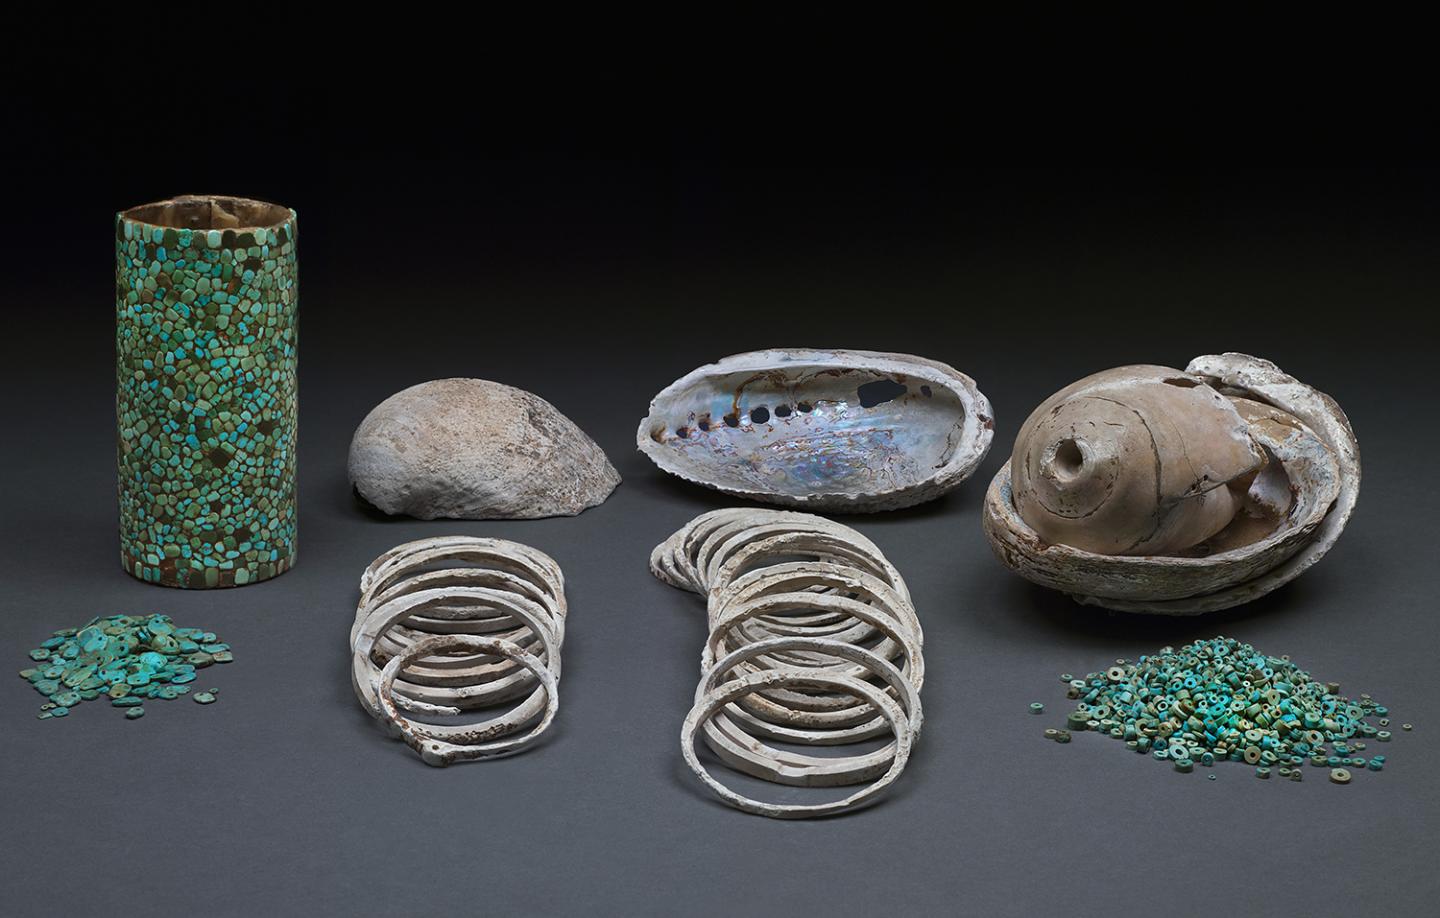 Conversations with a Curator - Economy of the Chumash: Shell Bead